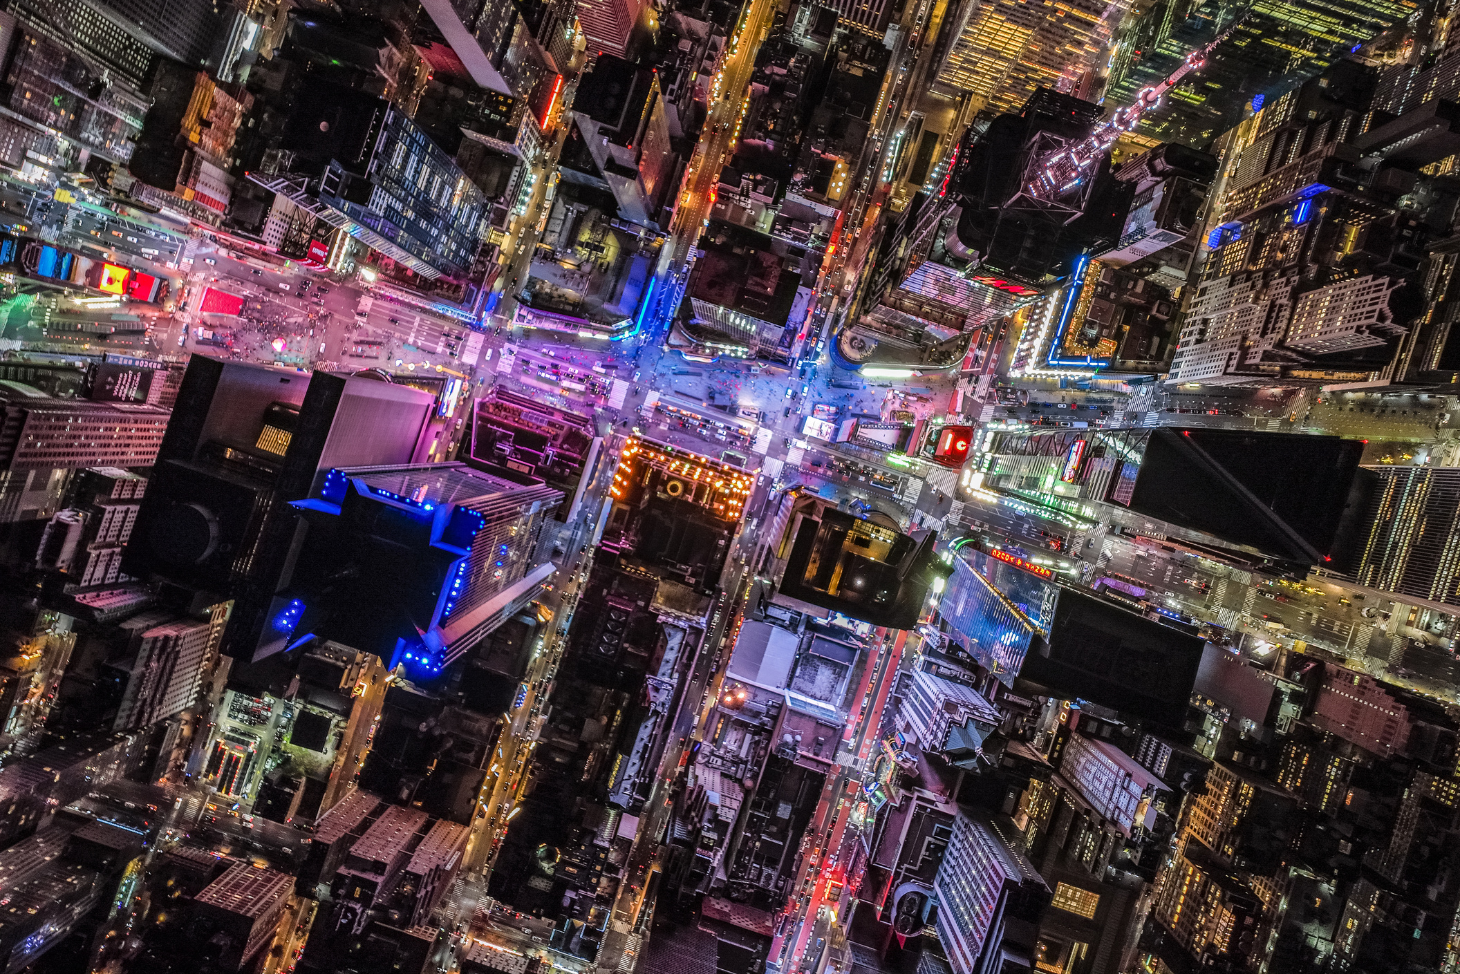 Overhead view of New York City at night